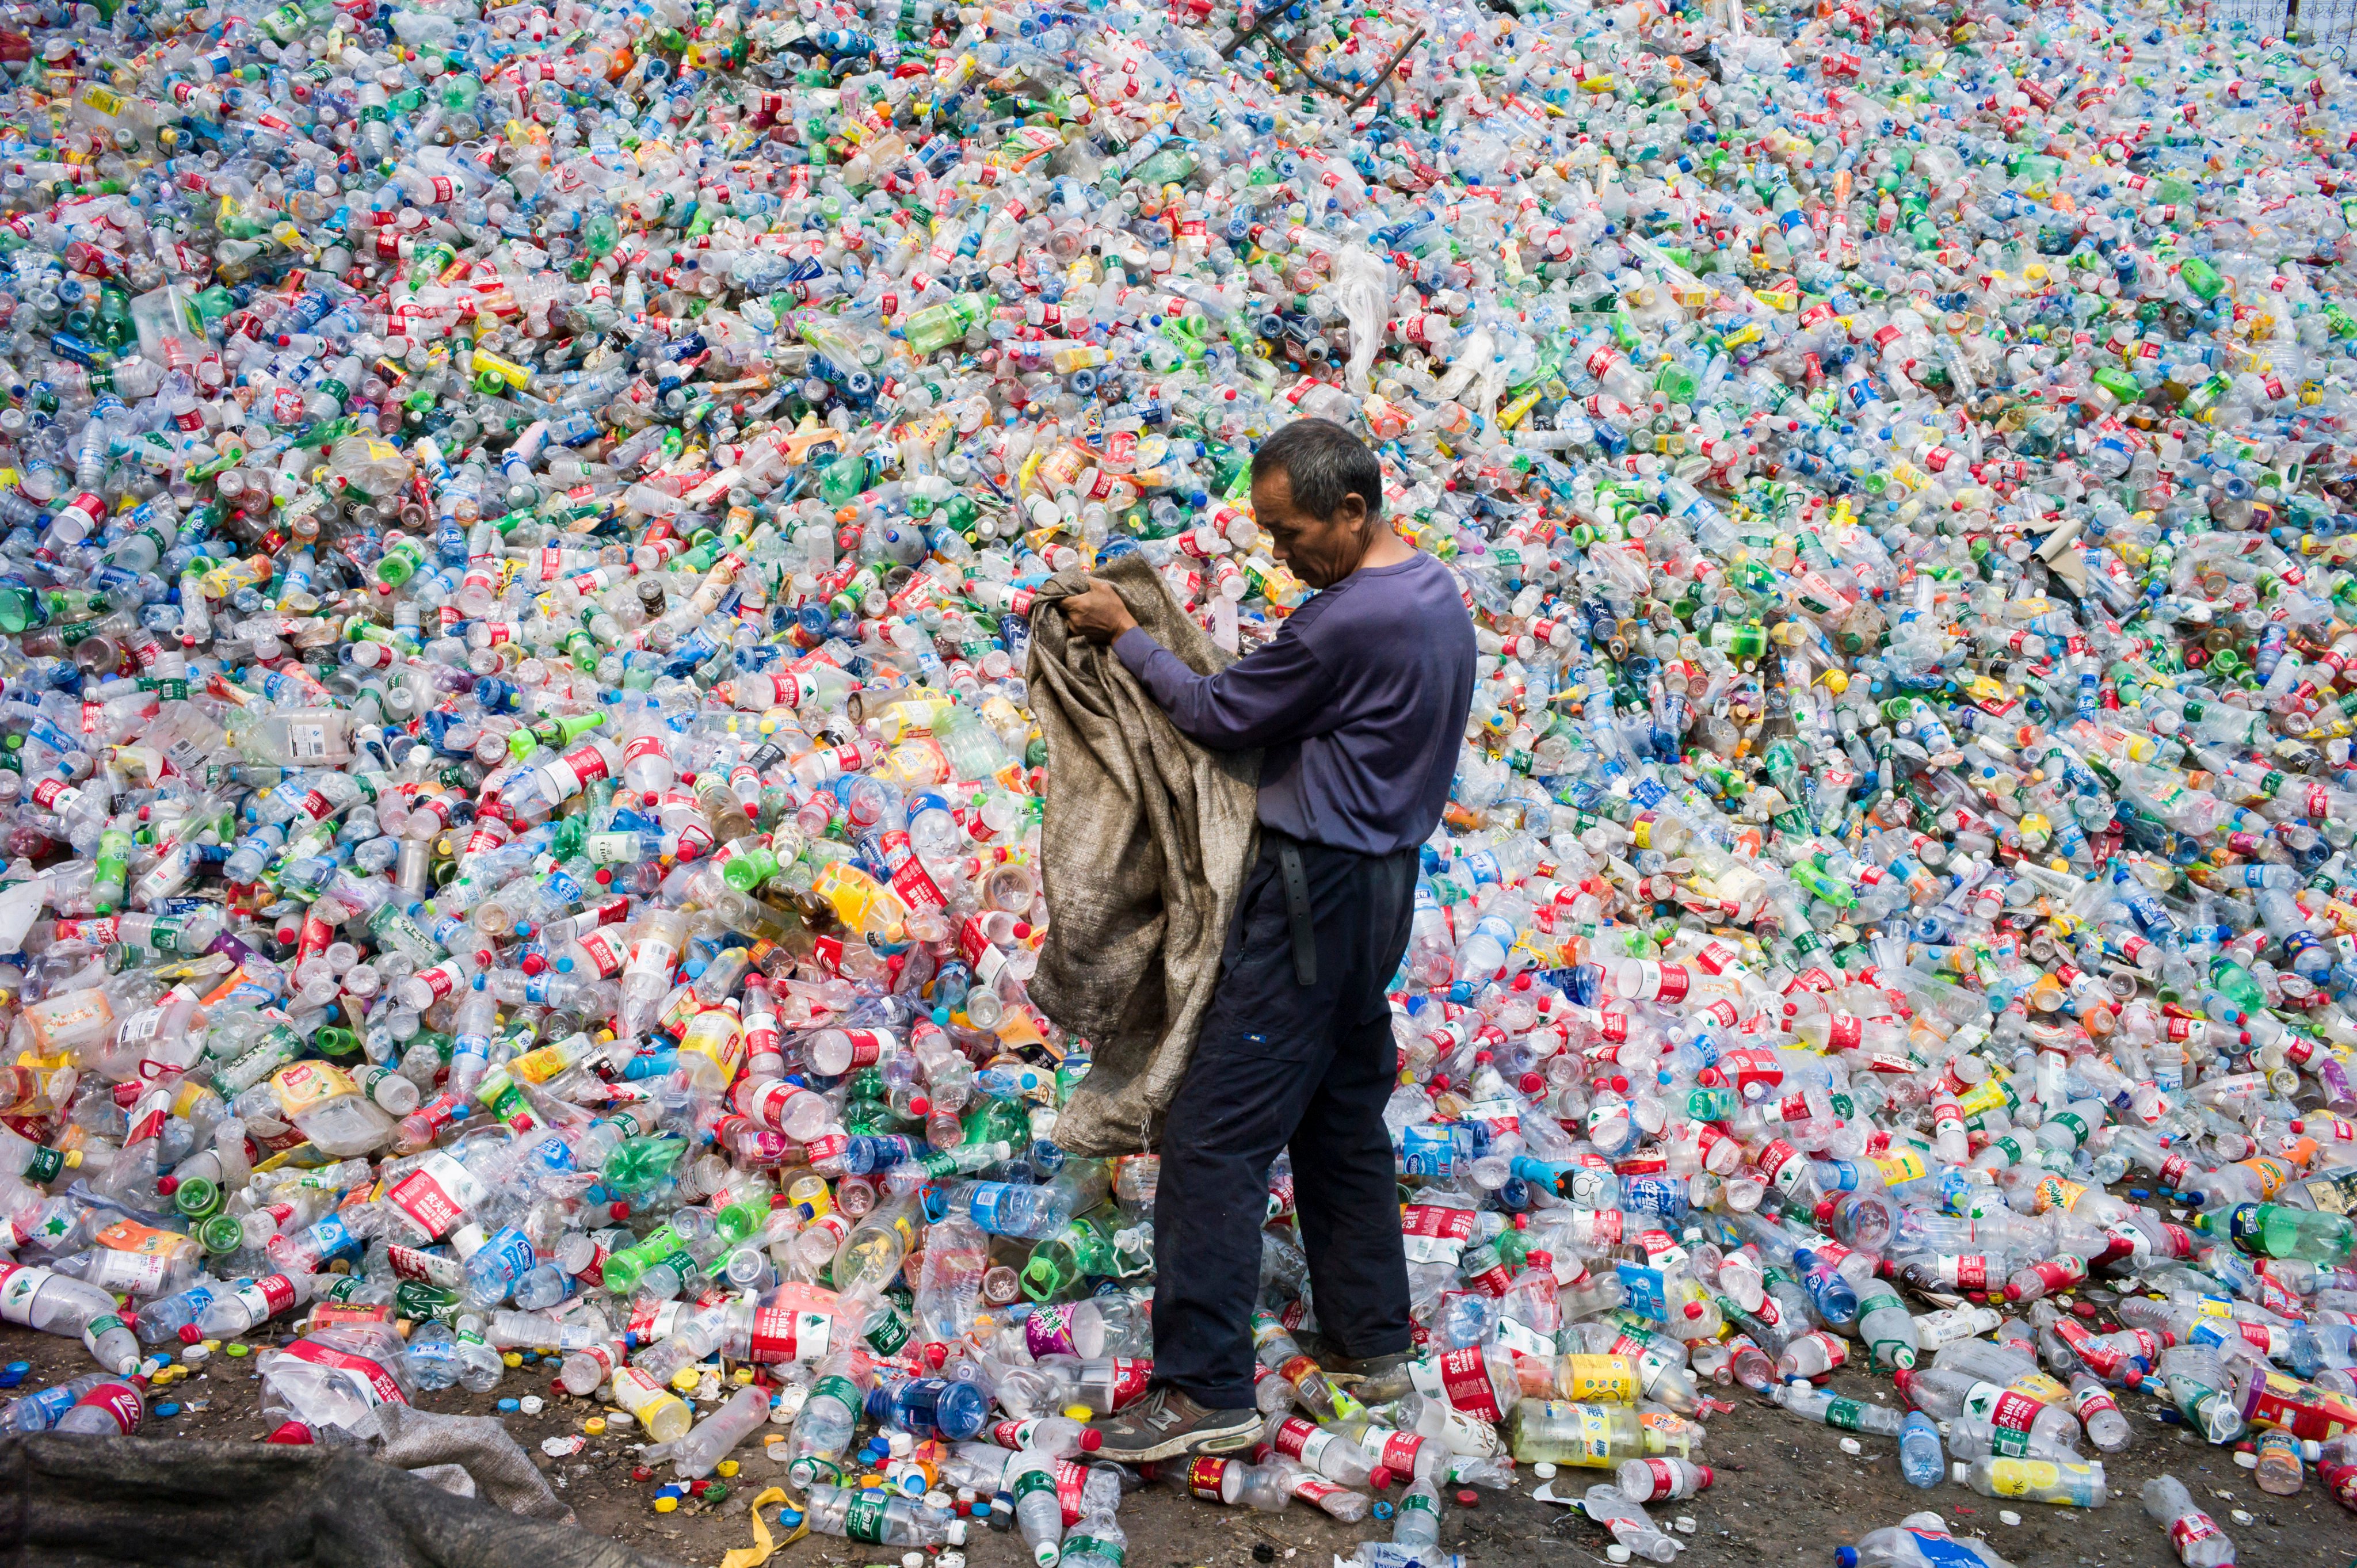 A Chinese worker sorts through a tidal wave of plastic at a waste management company in 2015. Photo: AFP